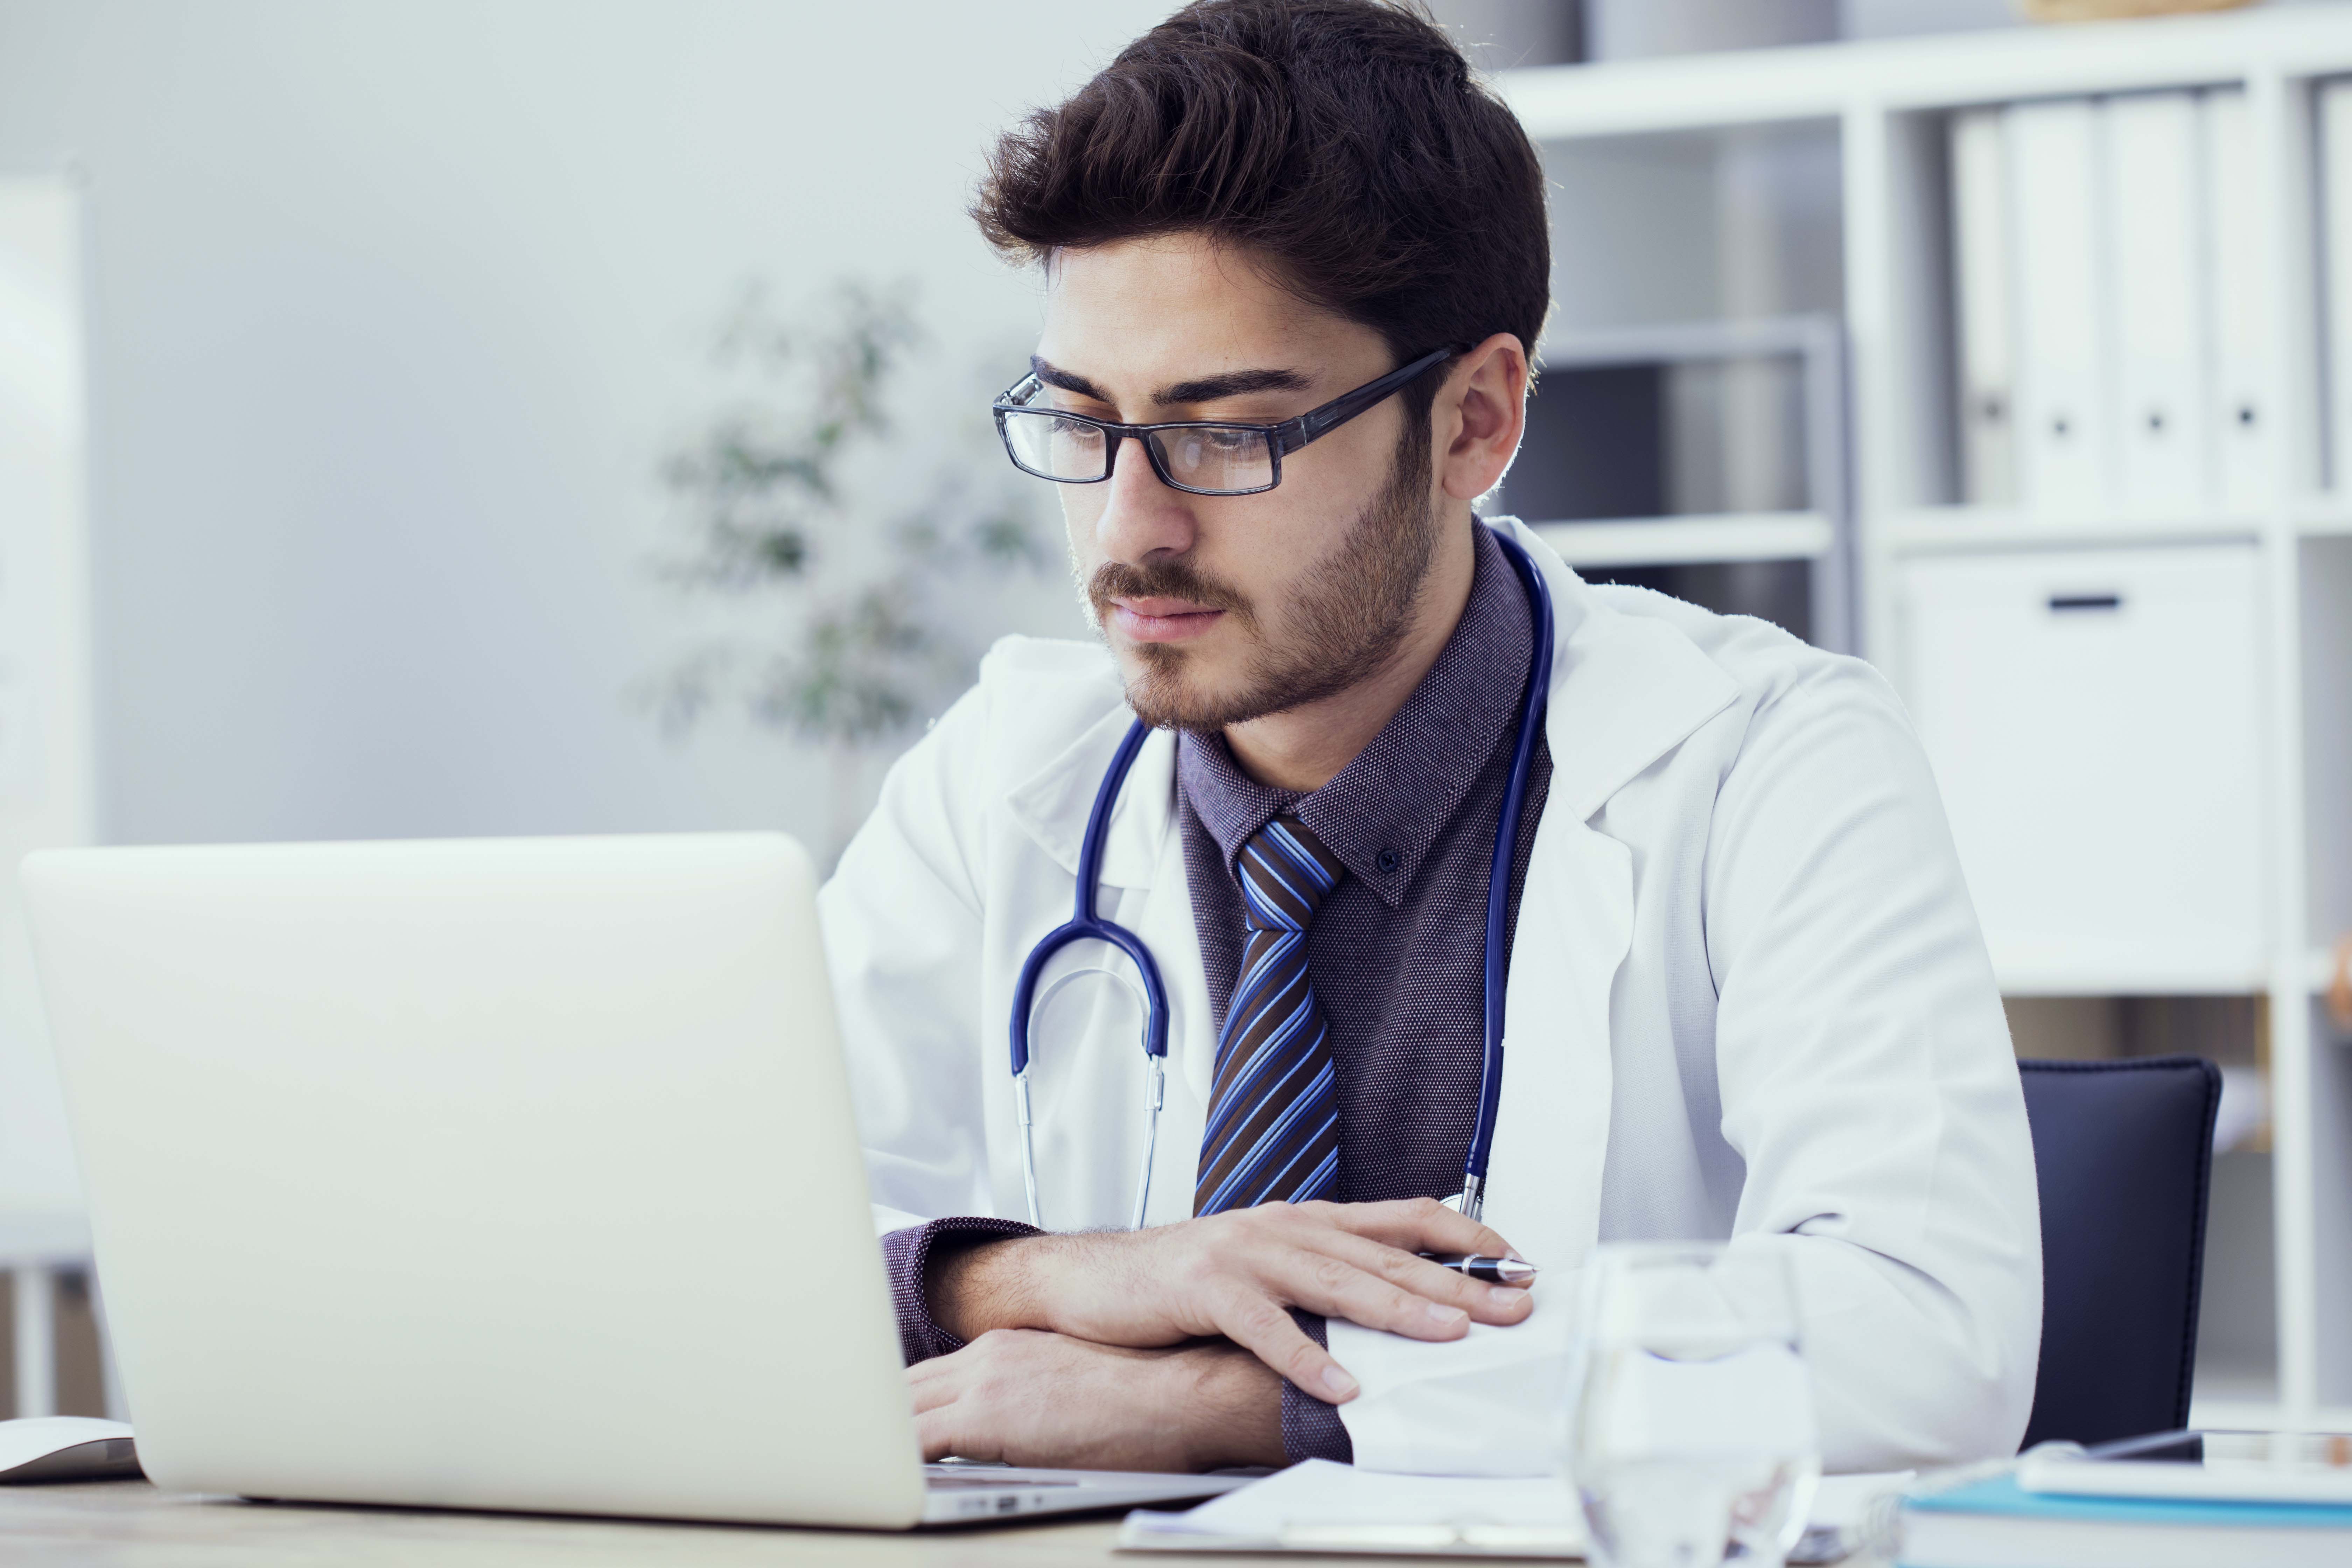 Portrait of doctor working on computer in medical office